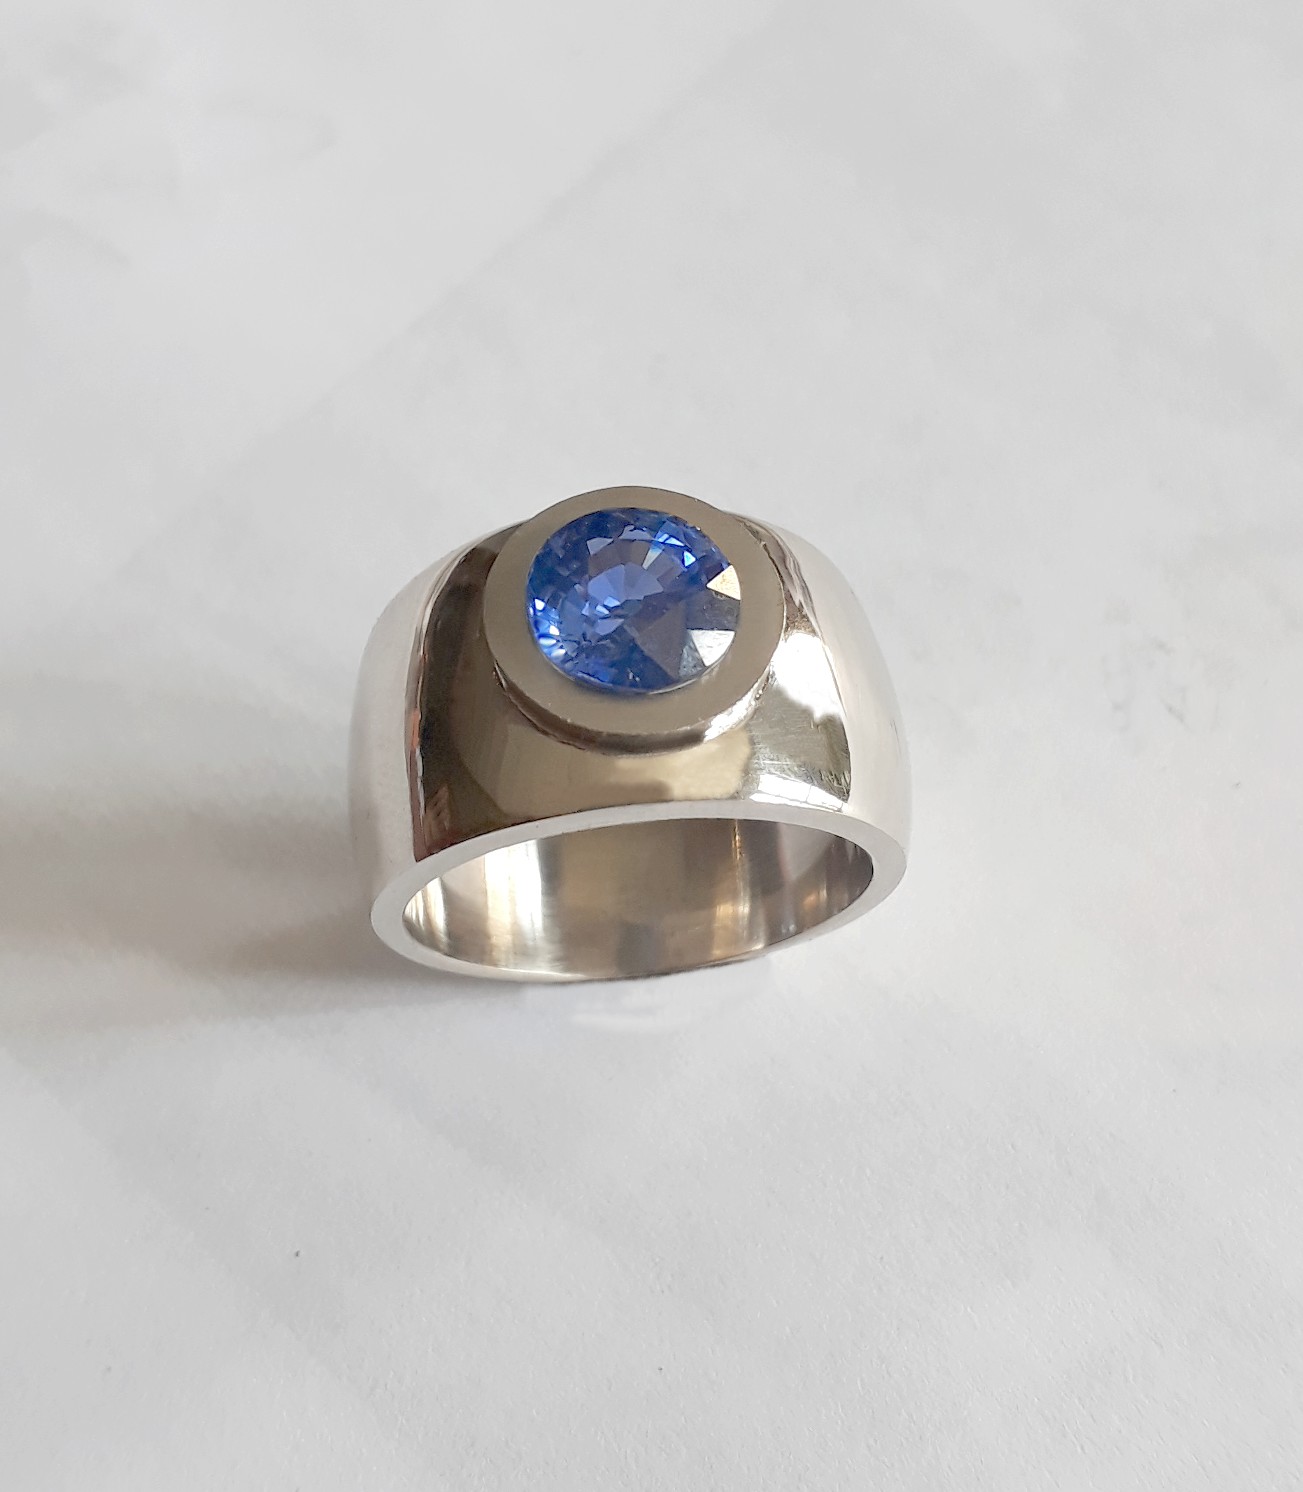 Man and his sapphire